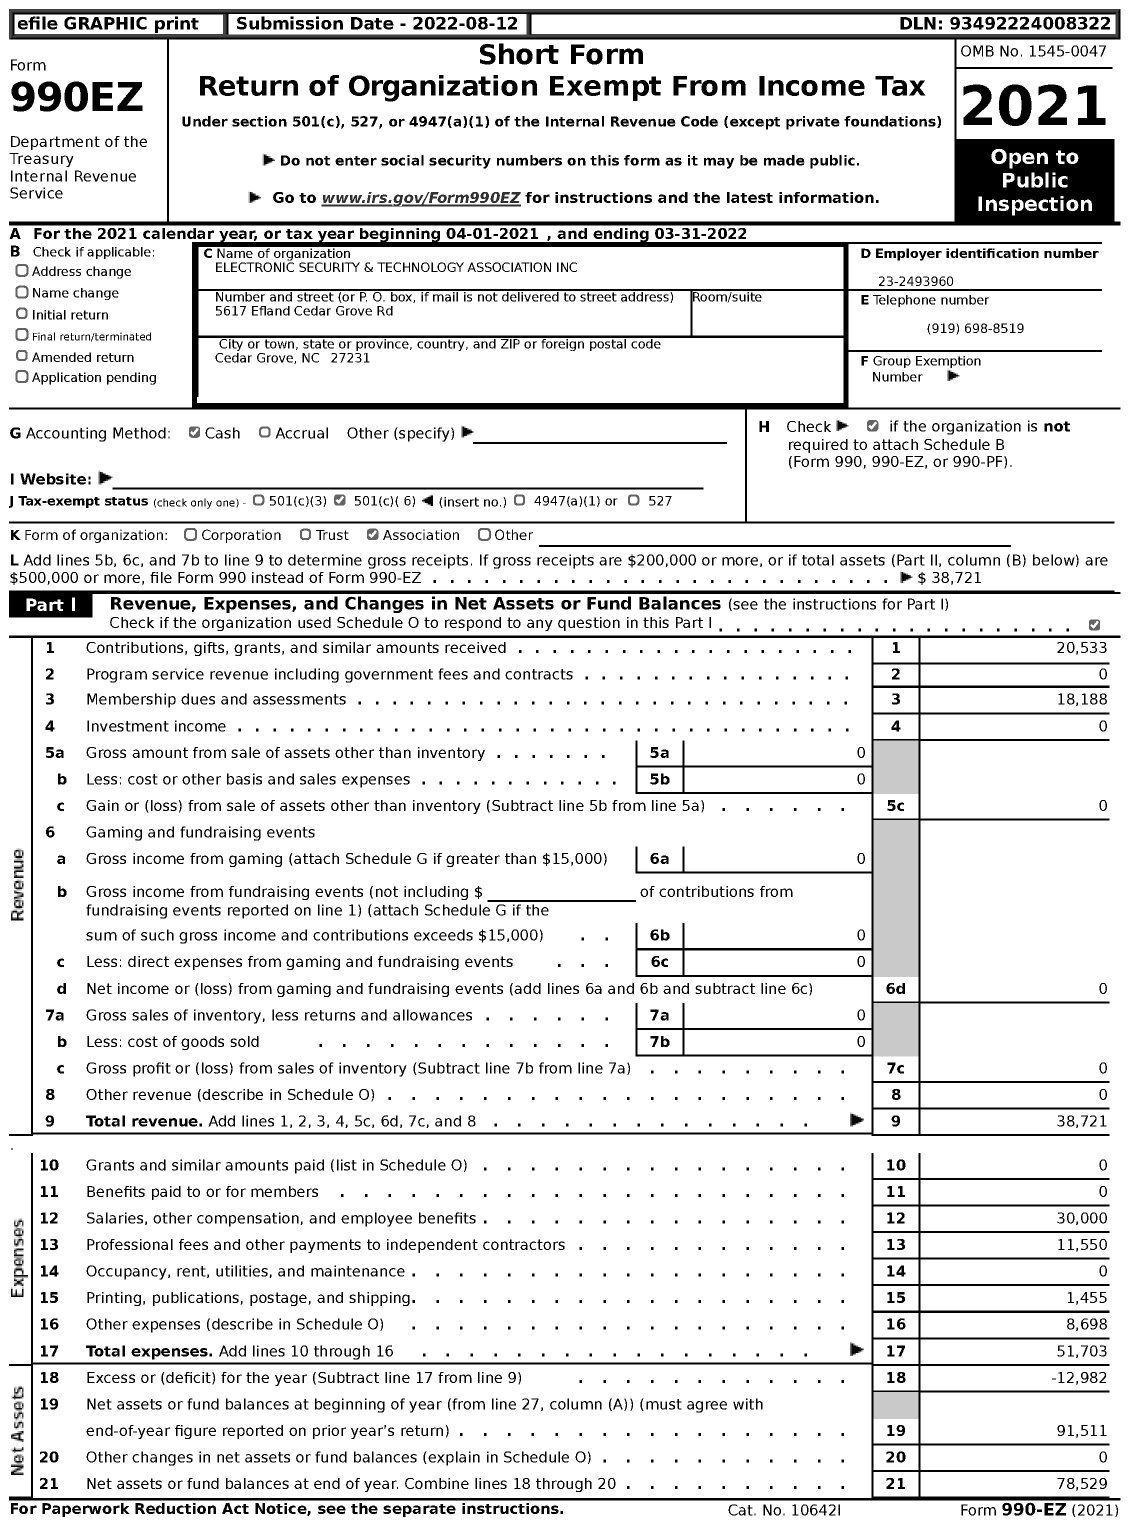 Image of first page of 2021 Form 990EZ for Electronic Security and Technology Association